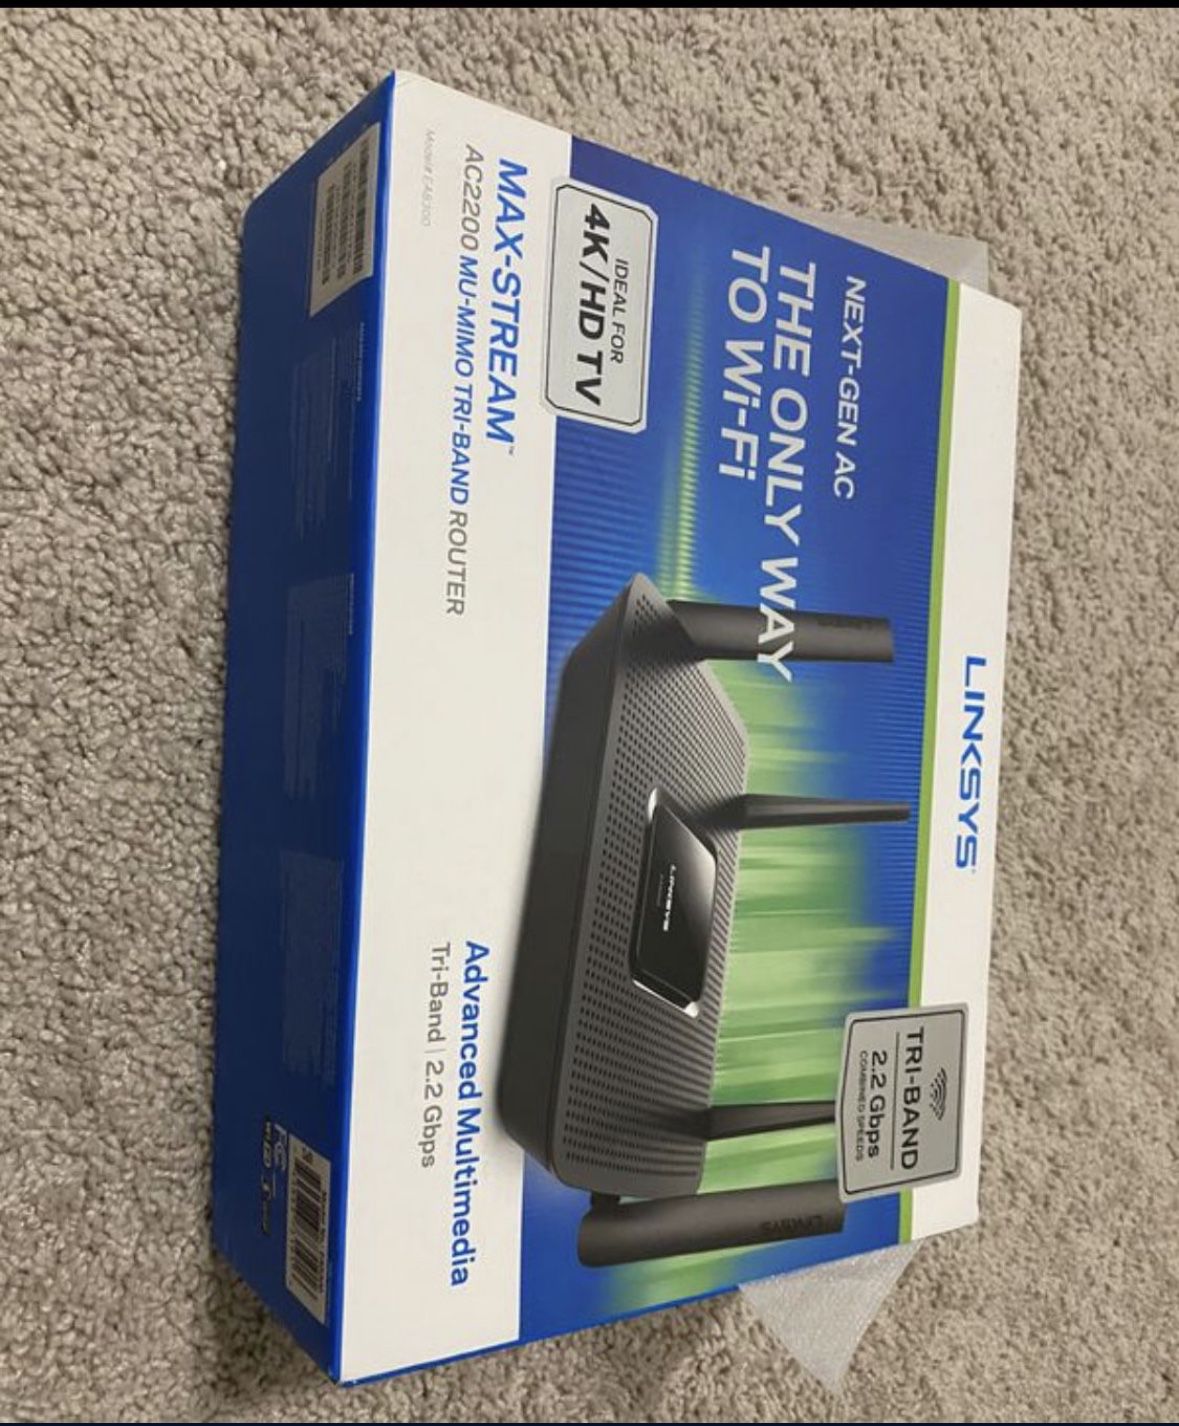 Linksys Triband Router